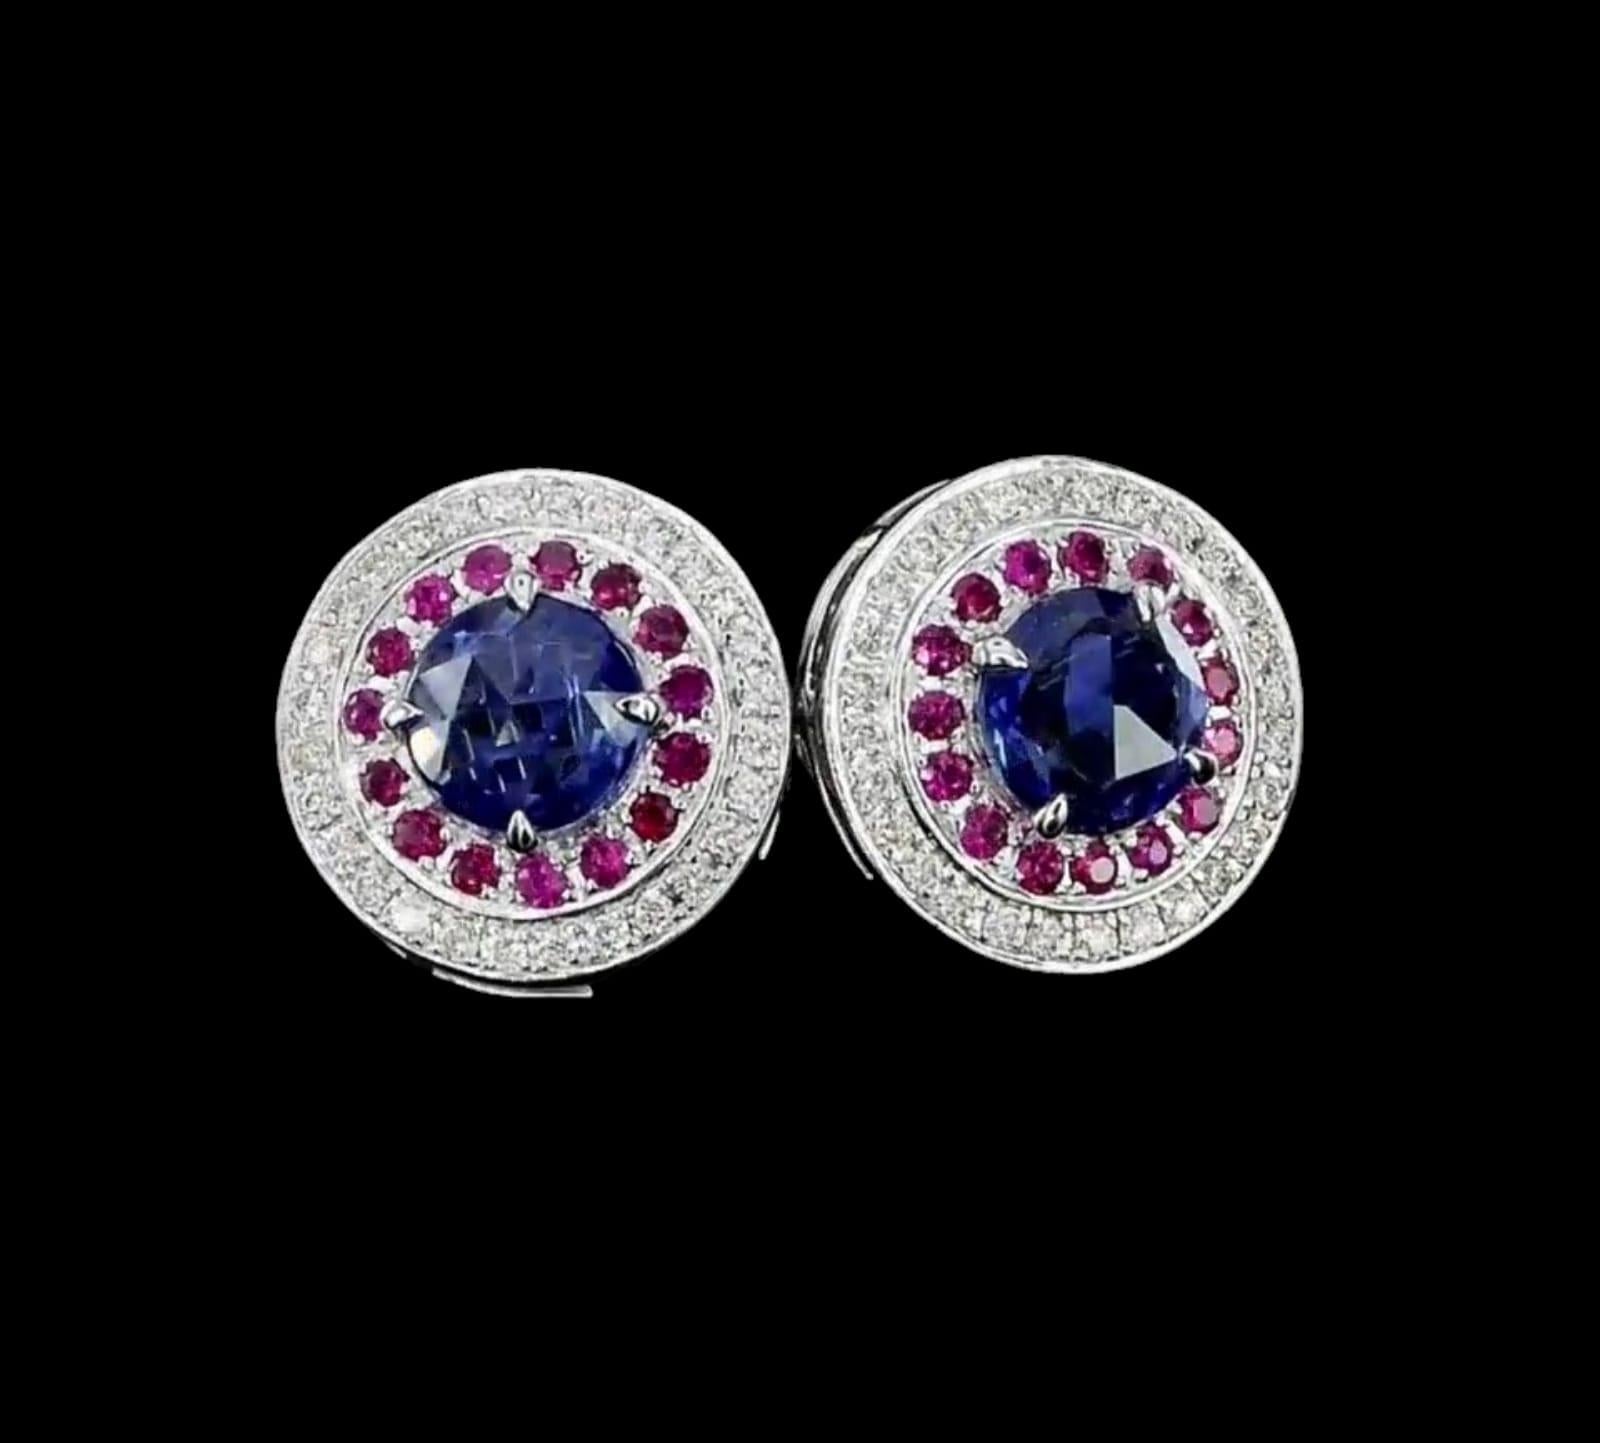 **100% NATURAL FANCY COLOUR DIAMOND JEWELRY**

✪ Jewelry Details ✪

♦ MAIN STONE DETAILS

➛ Stone Shape: Round
➛ Stone Weight: 02 pcs - 1.61 cts

♦ GROSS WEIGHT: 4.9 grams

➛ Metal Type: 14k White Gold
➛ Jewelry Type: Diamond earrings, Stud